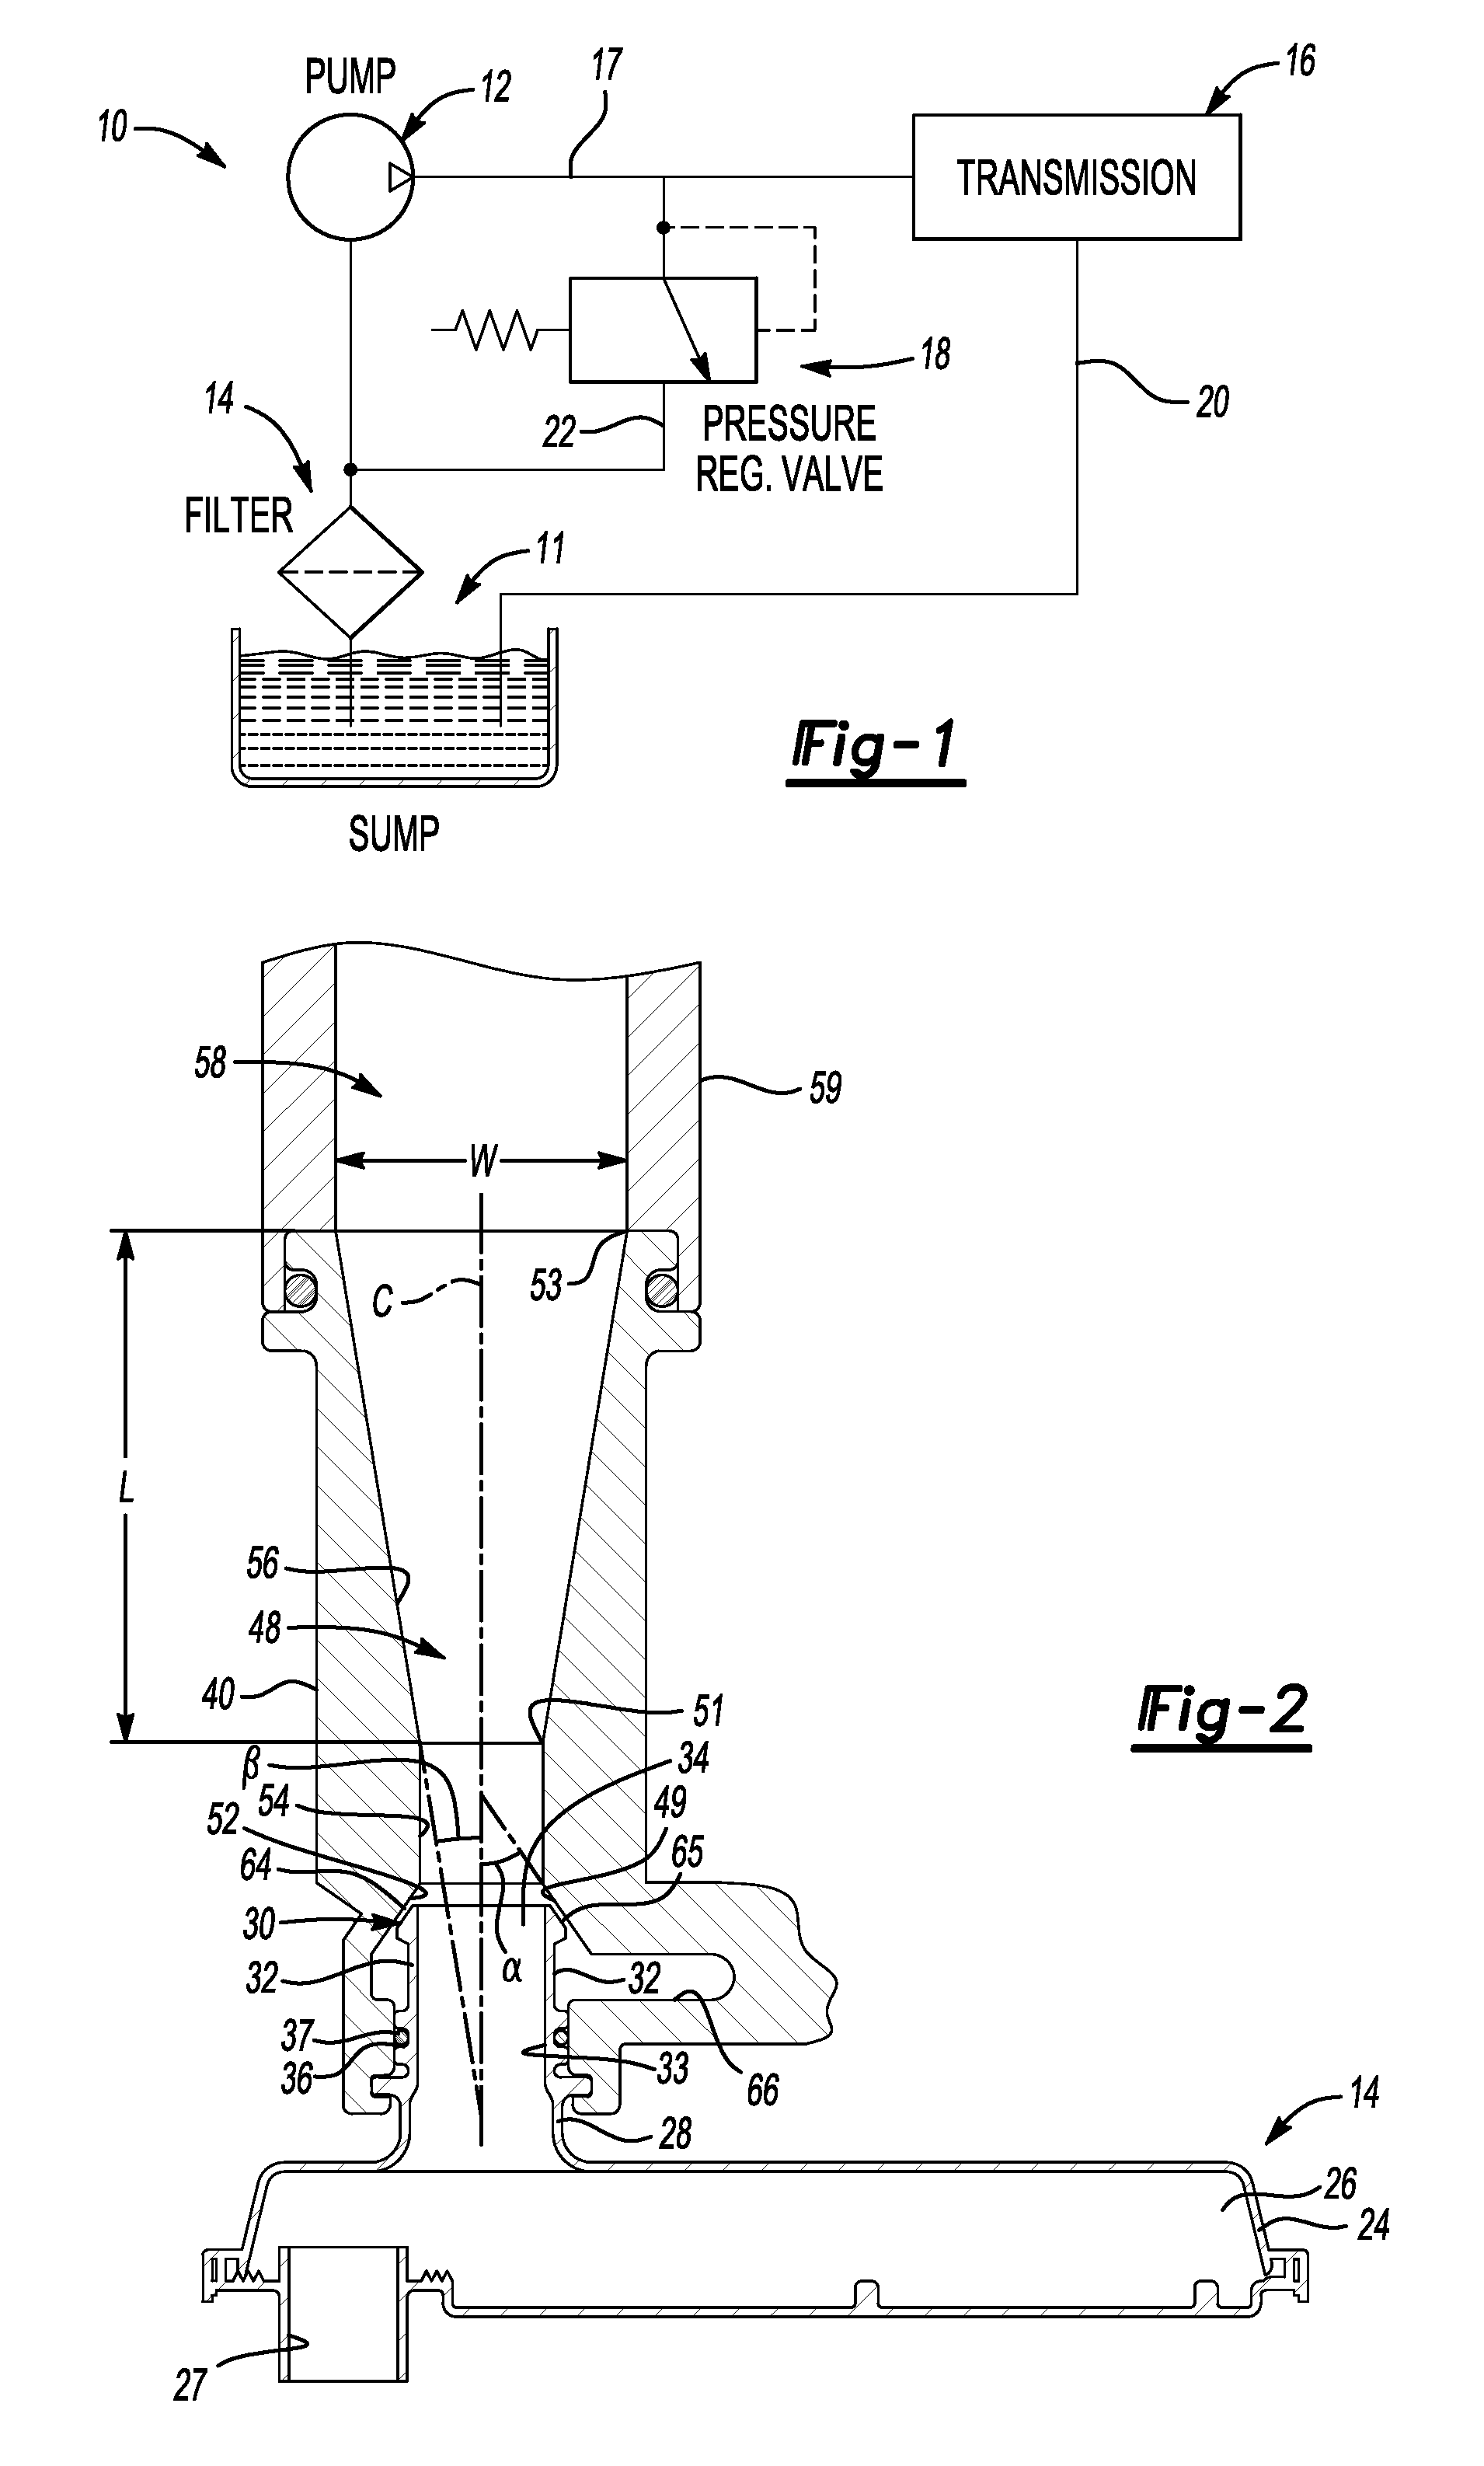 Hydraulic System For A Transmission With Pump Inlet Diffuser